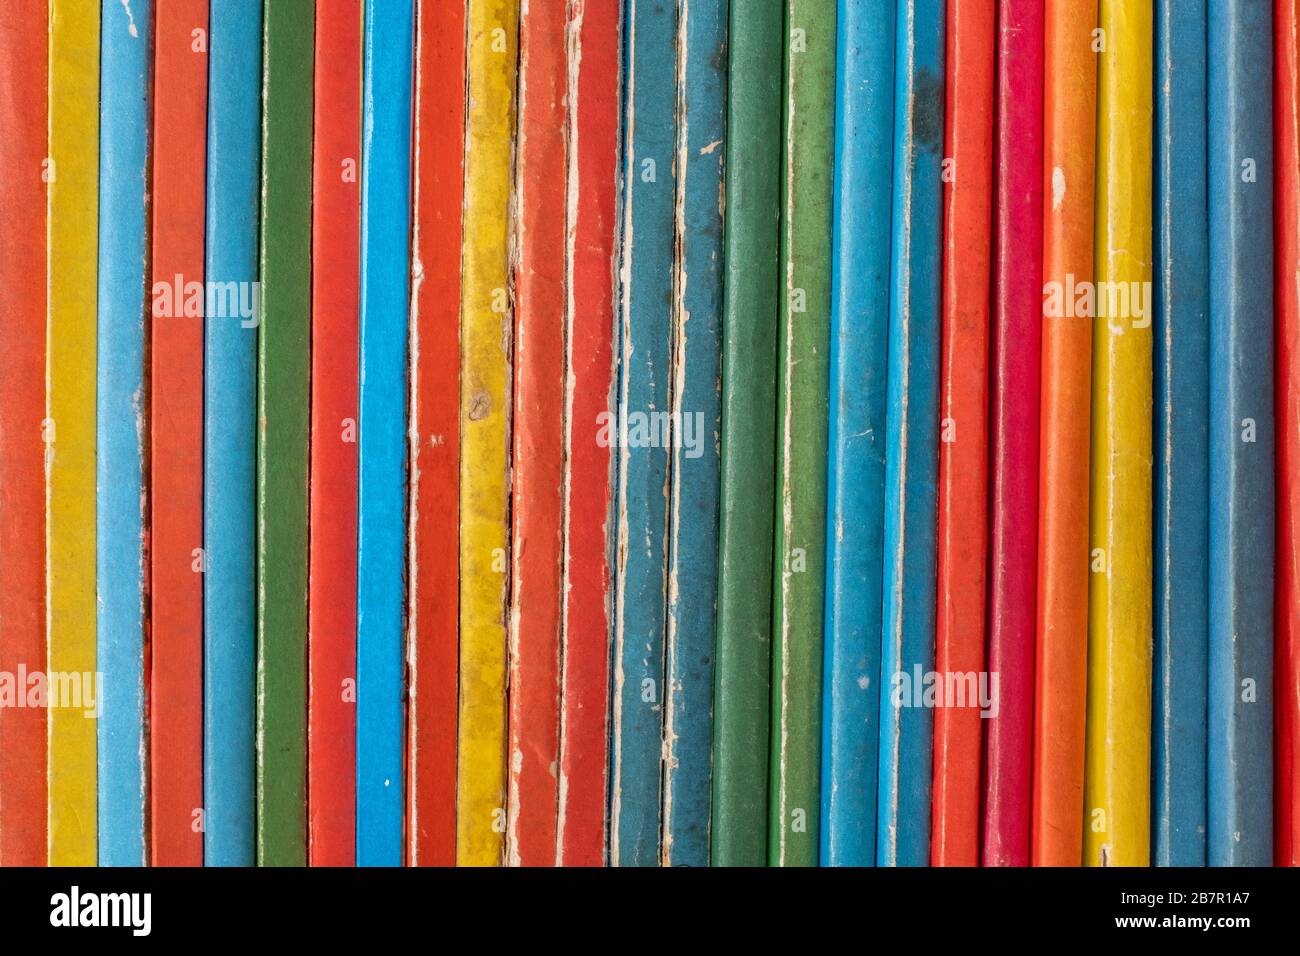 Abstract Background Of Colourful Old Vintage Children's Books On A Shelf Stock Photo